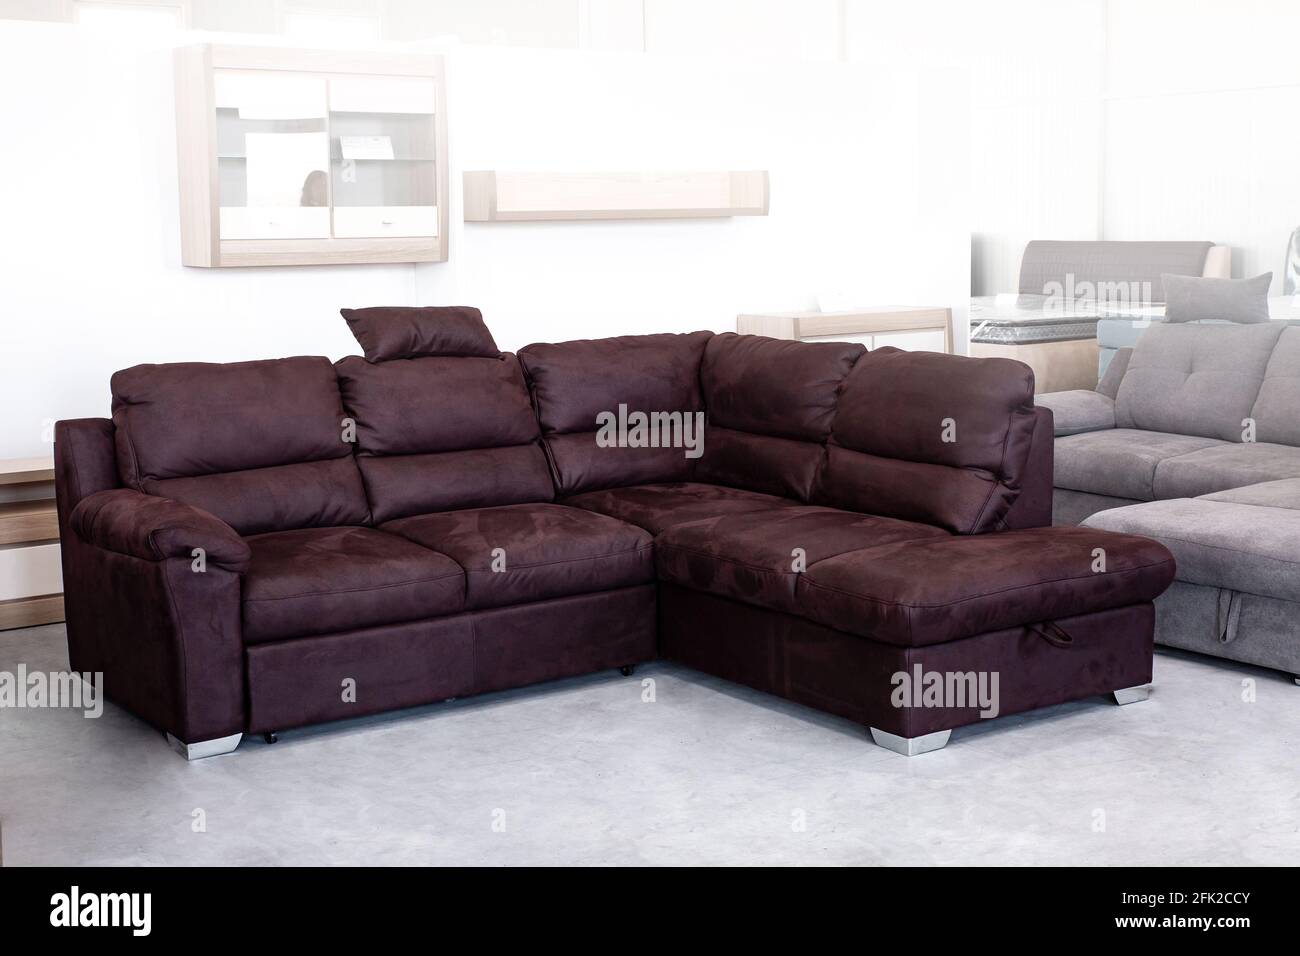 Modern design living room interior with corner sofa in a brown color Stock  Photo - Alamy